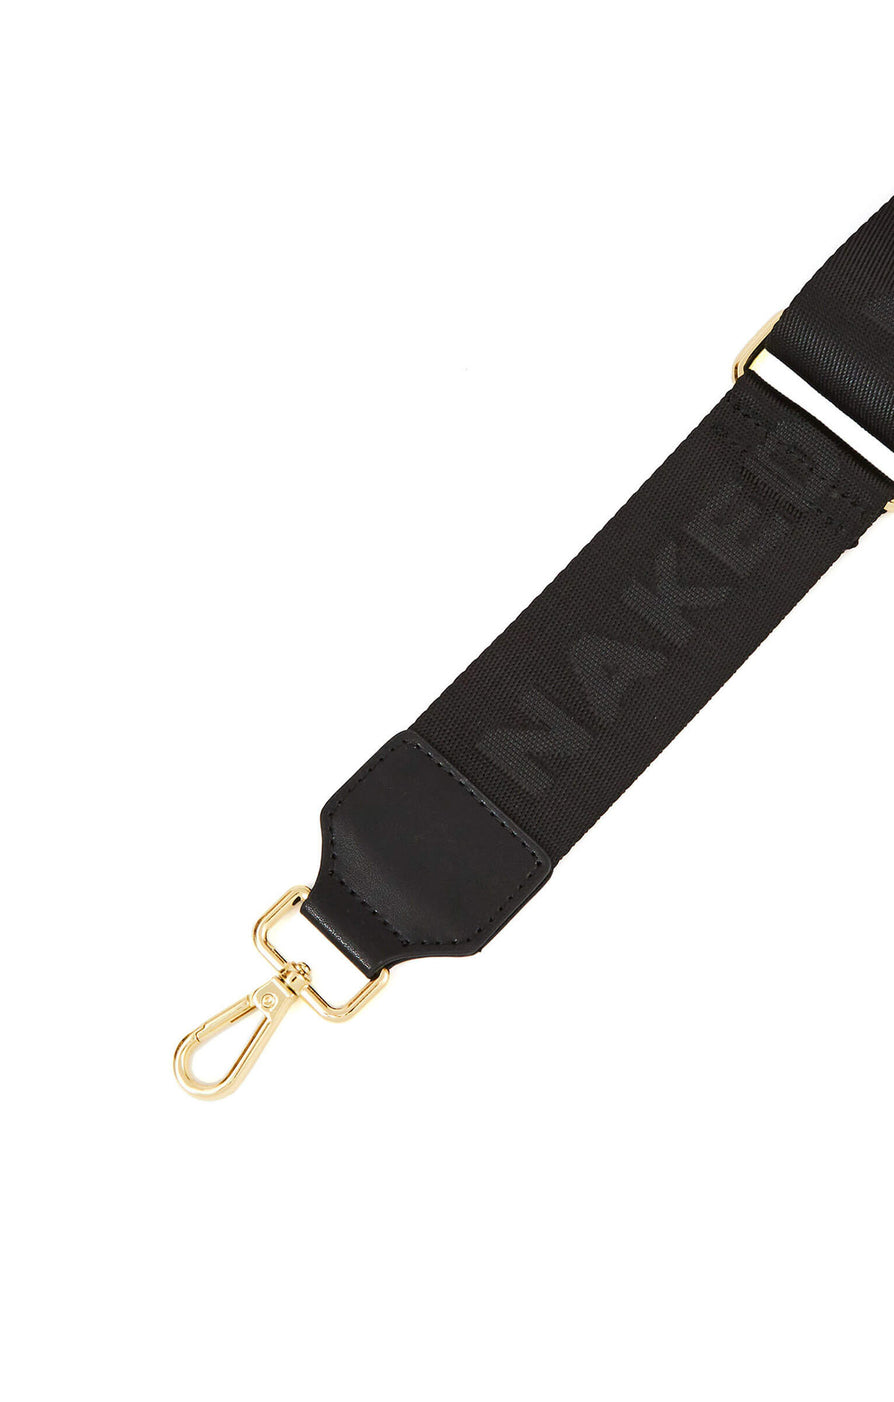 THE BRANDED GOLD STRAP